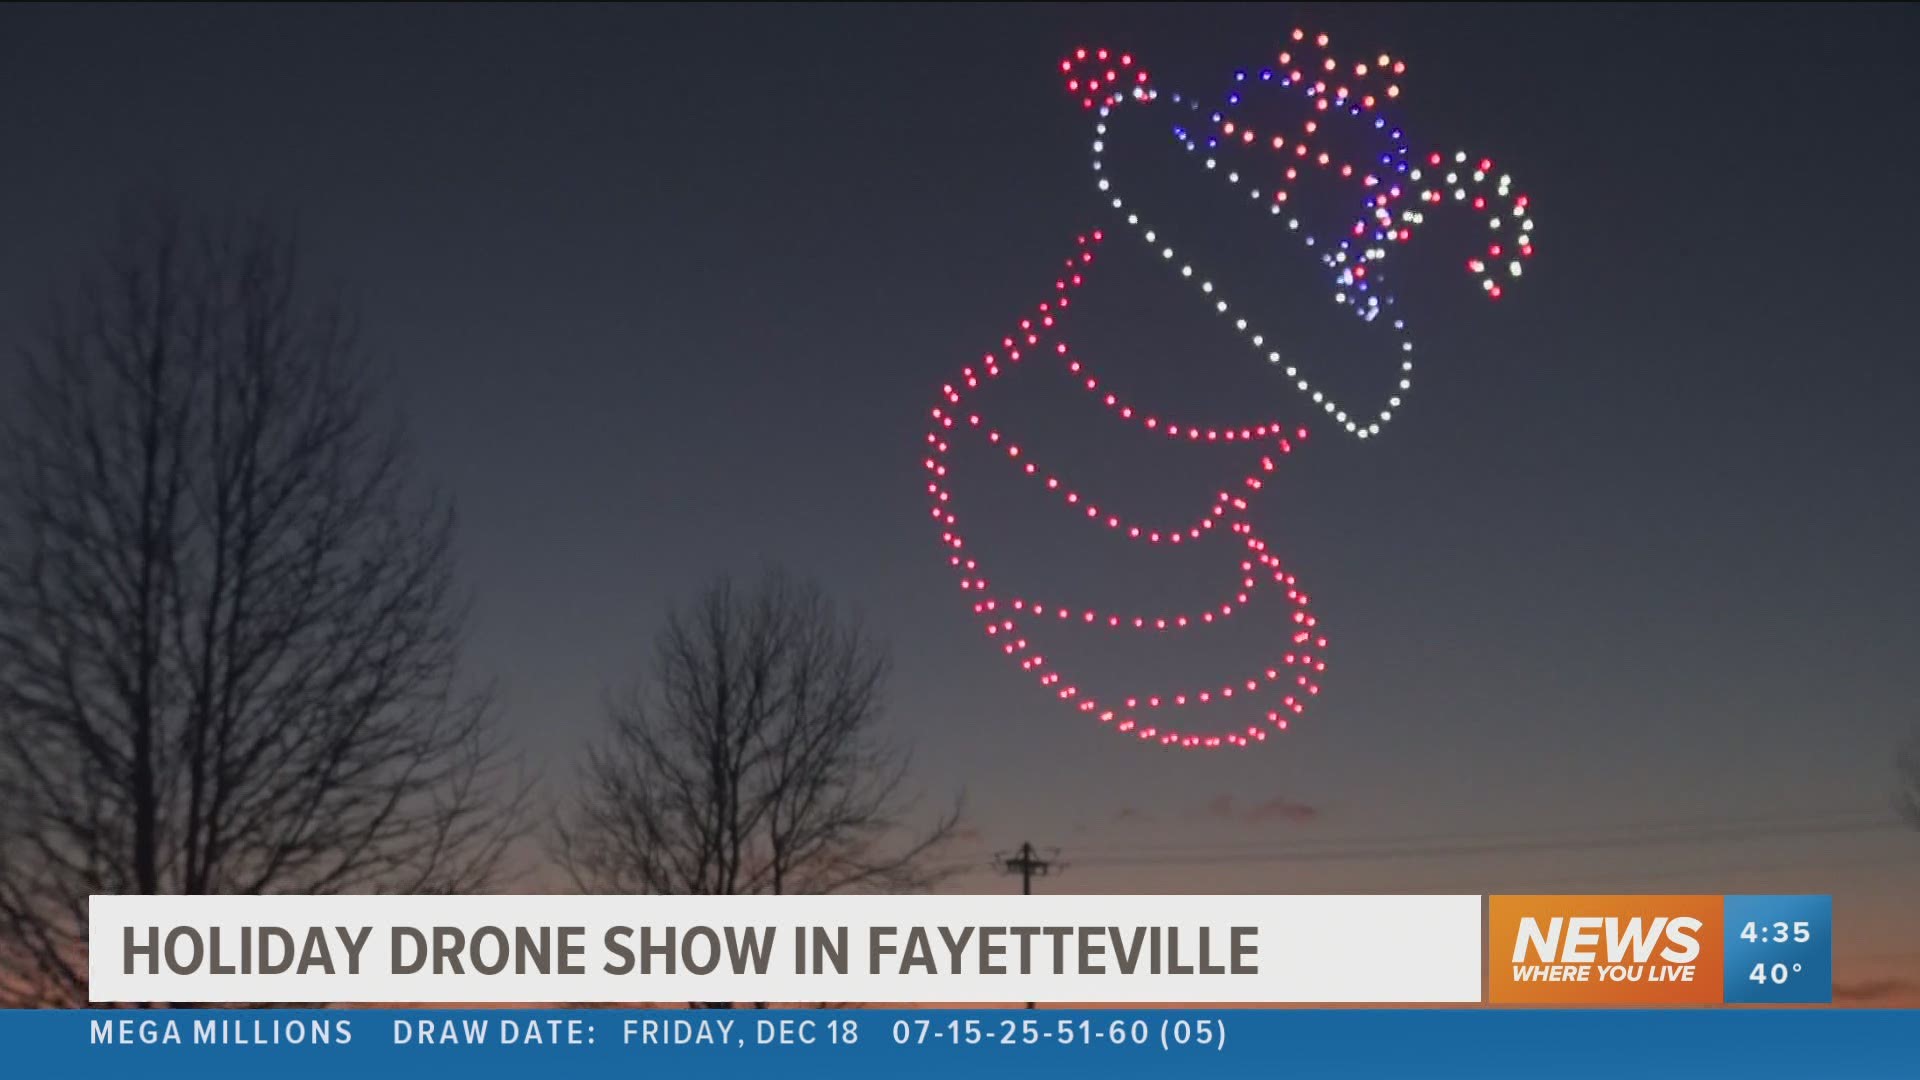 Walmart hosted their first-ever Holiday Drone Light Show at the 112 Drive-In in Fayetteville to end the year with some Christmas joy.